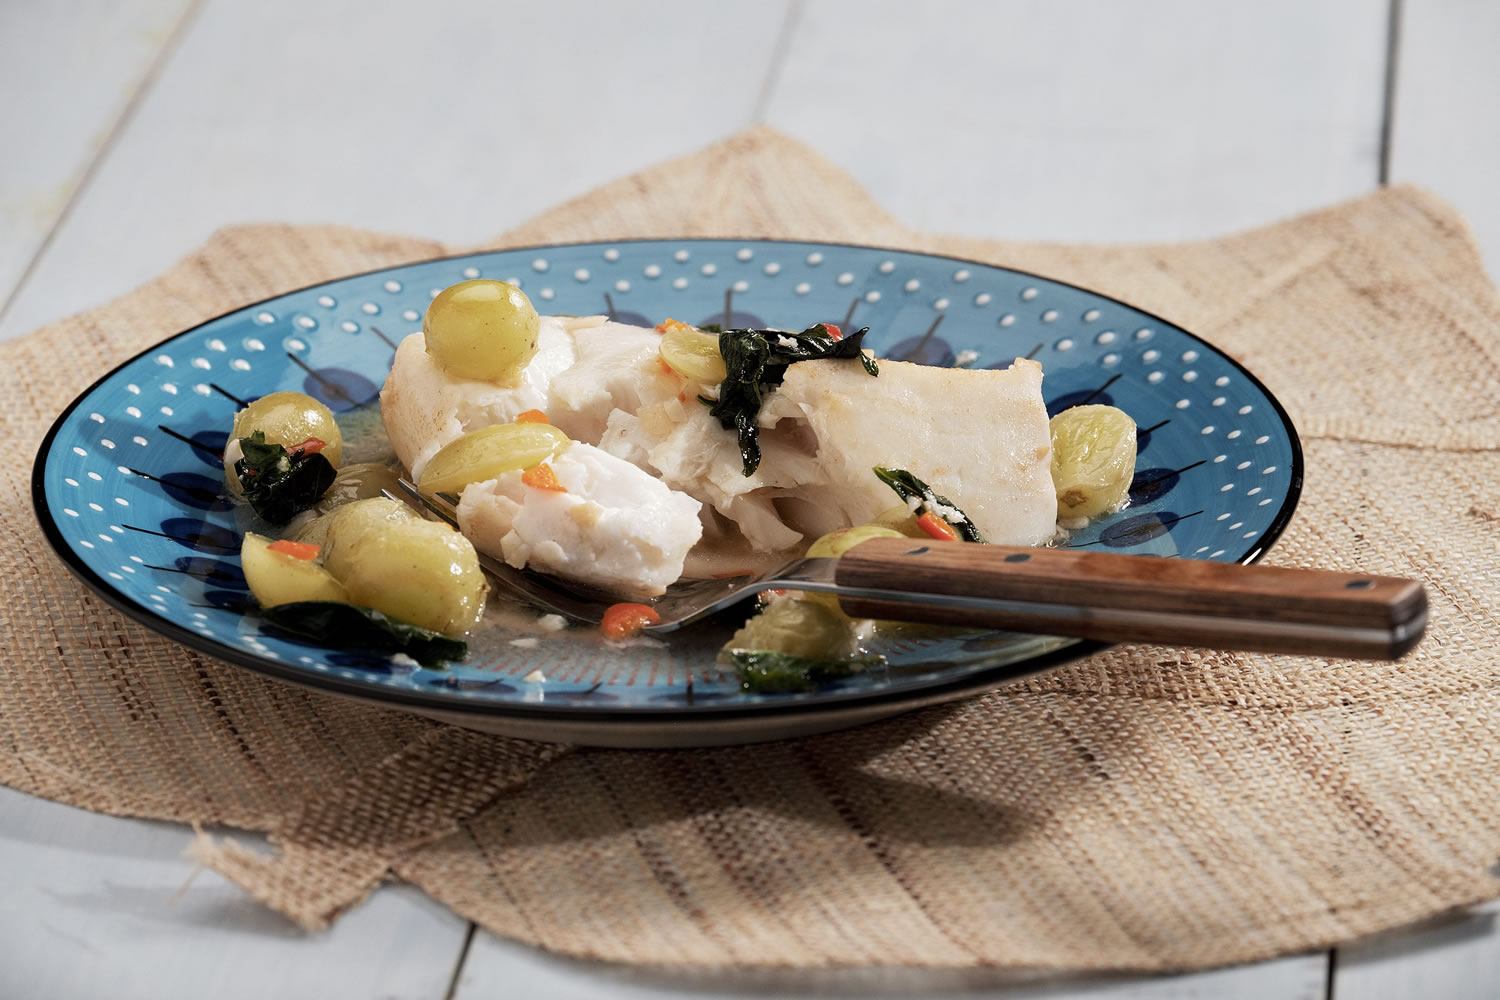 Italian Halibut With Grapes and Olive Oil.